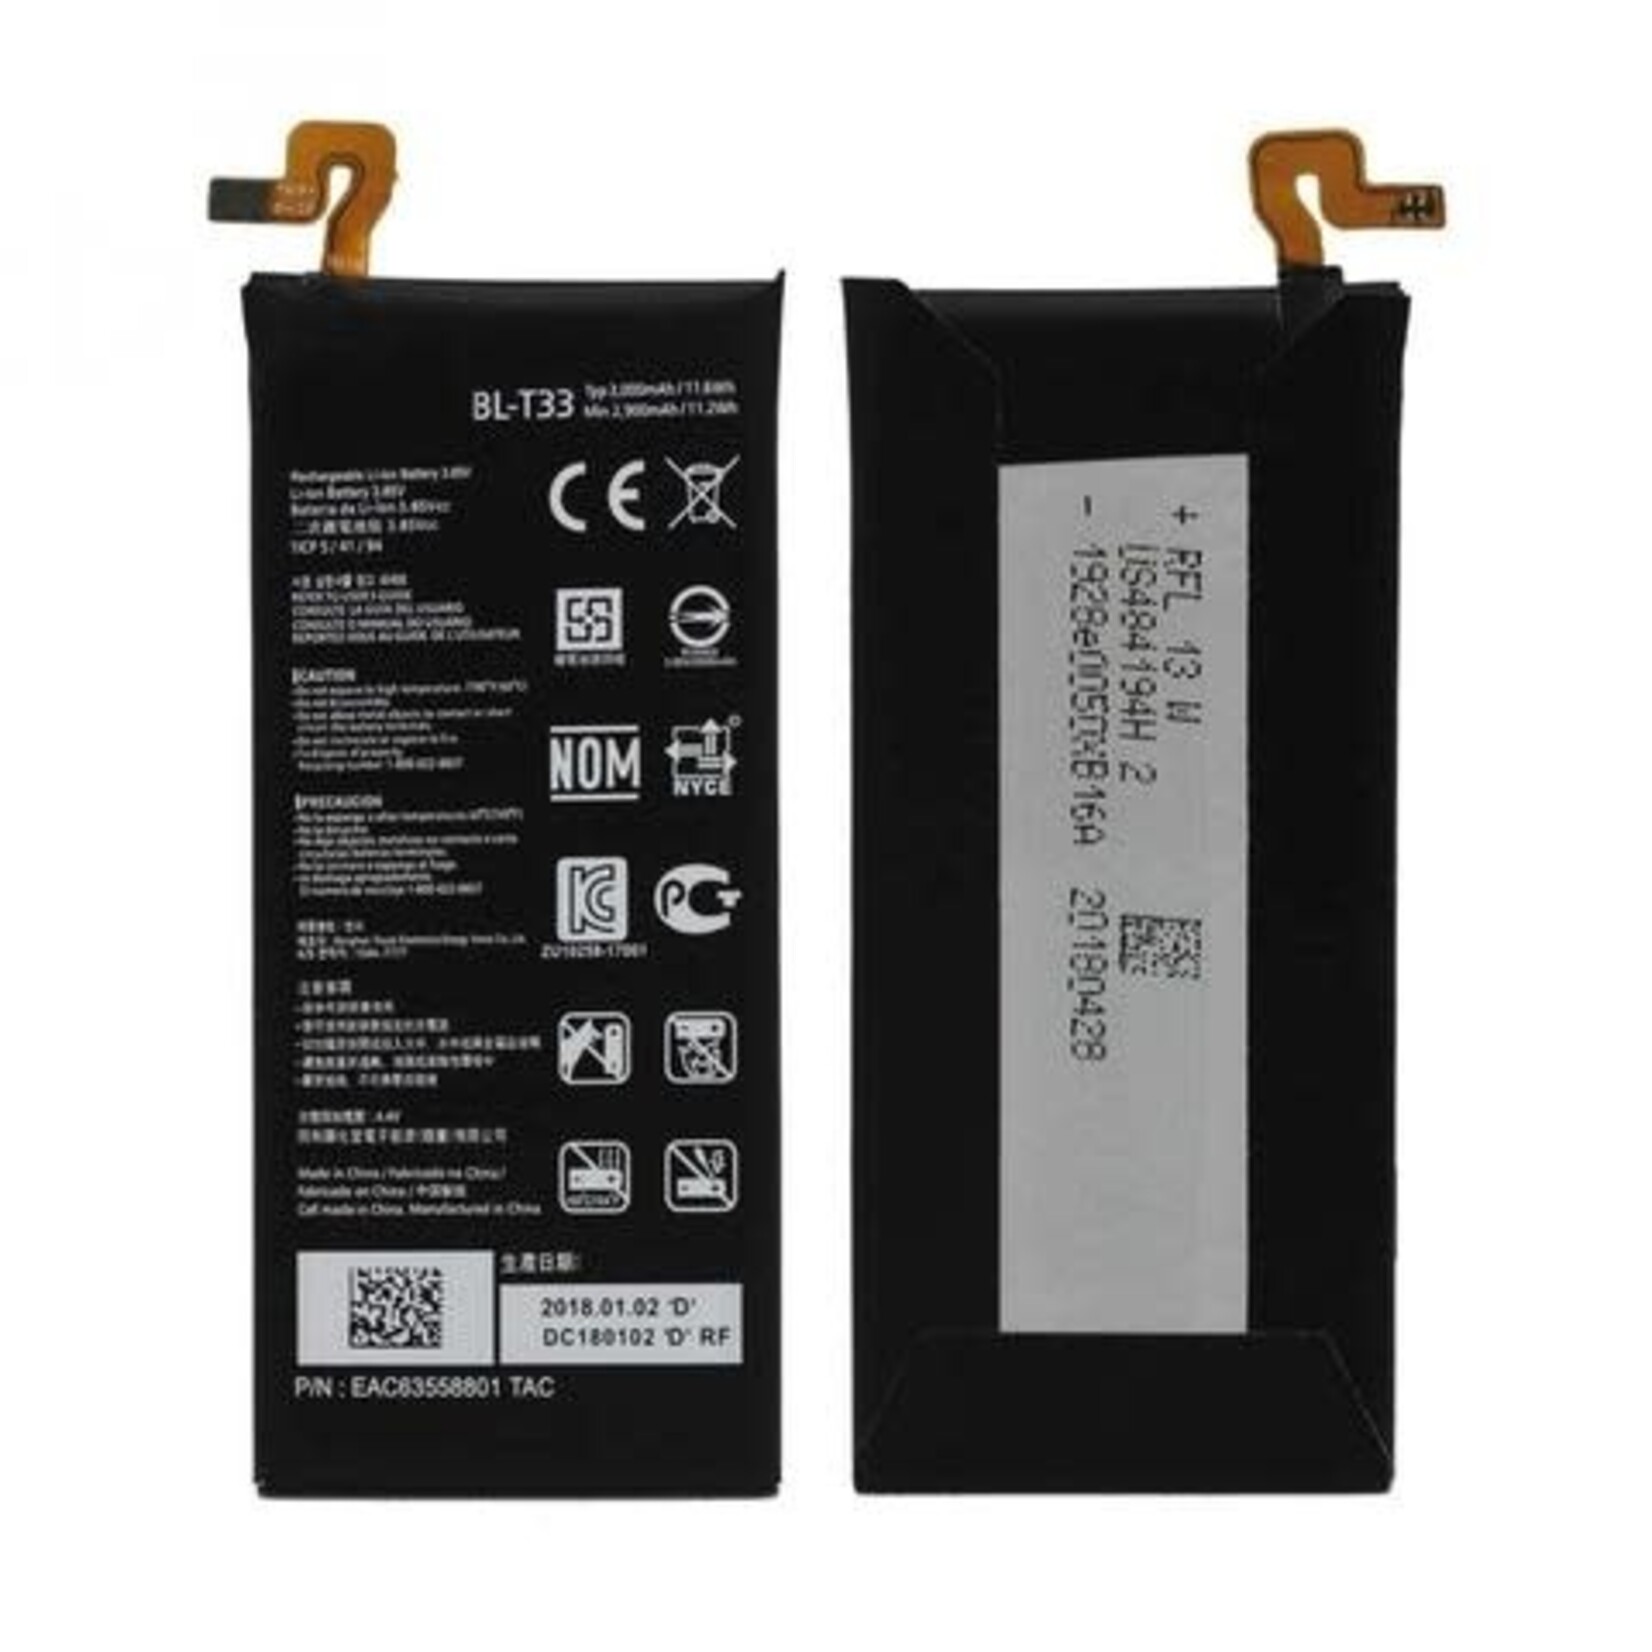 LG REPLACEMENT BATTERY LG Q6